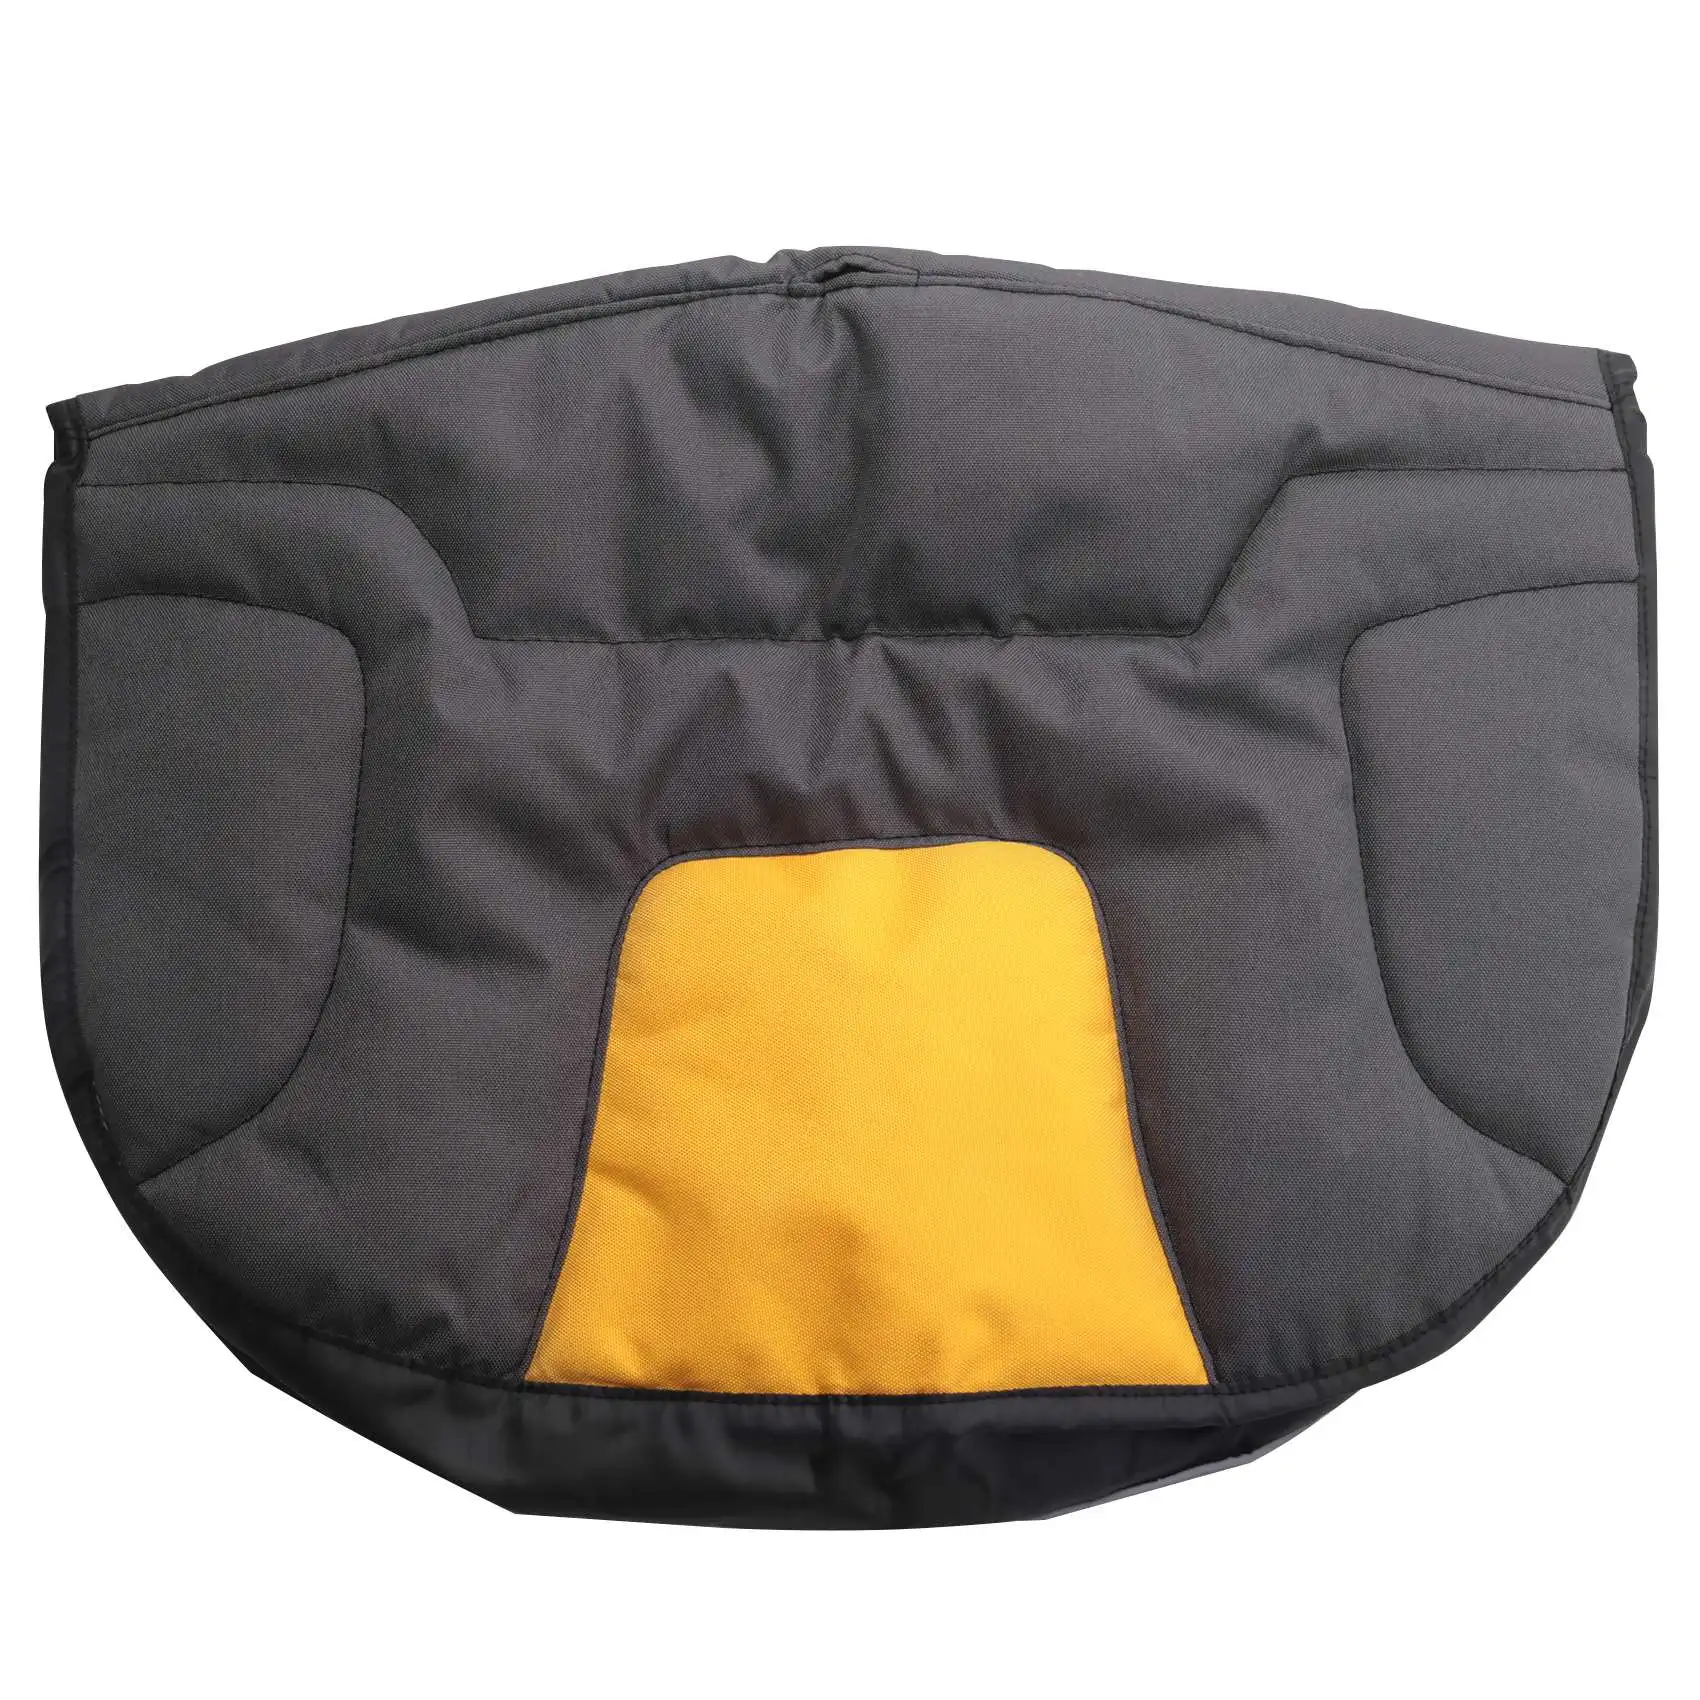 

Universal Riding Lawn Mower Tractor Seat Cover Padded Comfort Pad Storage ​Pouch for Heavy Farm Vehicle Tractor Mower